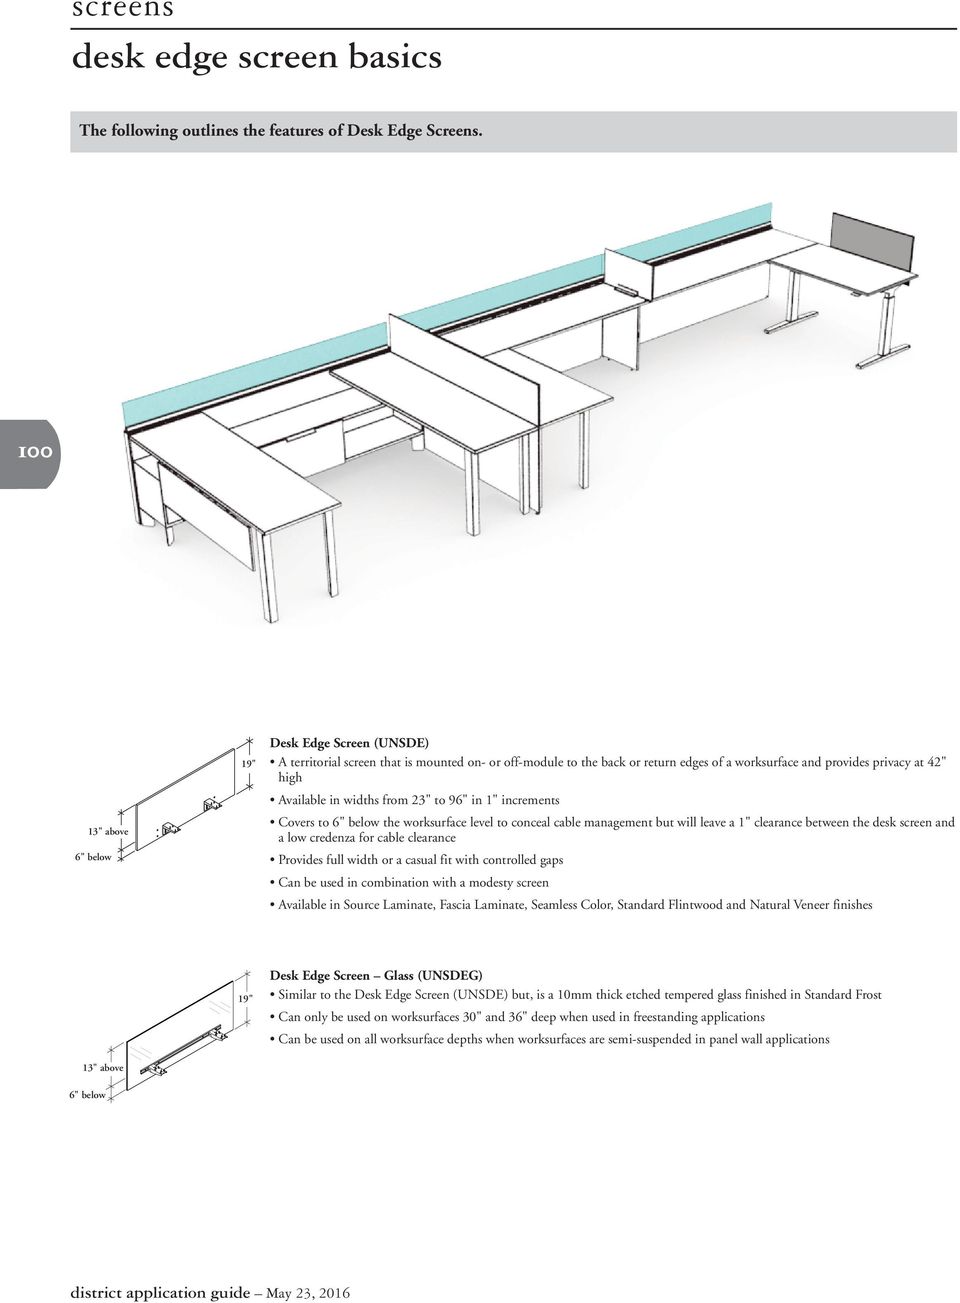 widths from 23" to " in 1" increments Covers to 6" below the worksurface level to conceal cable management but will leave a 1" clearance between the desk screen and a low credenza for cable clearance